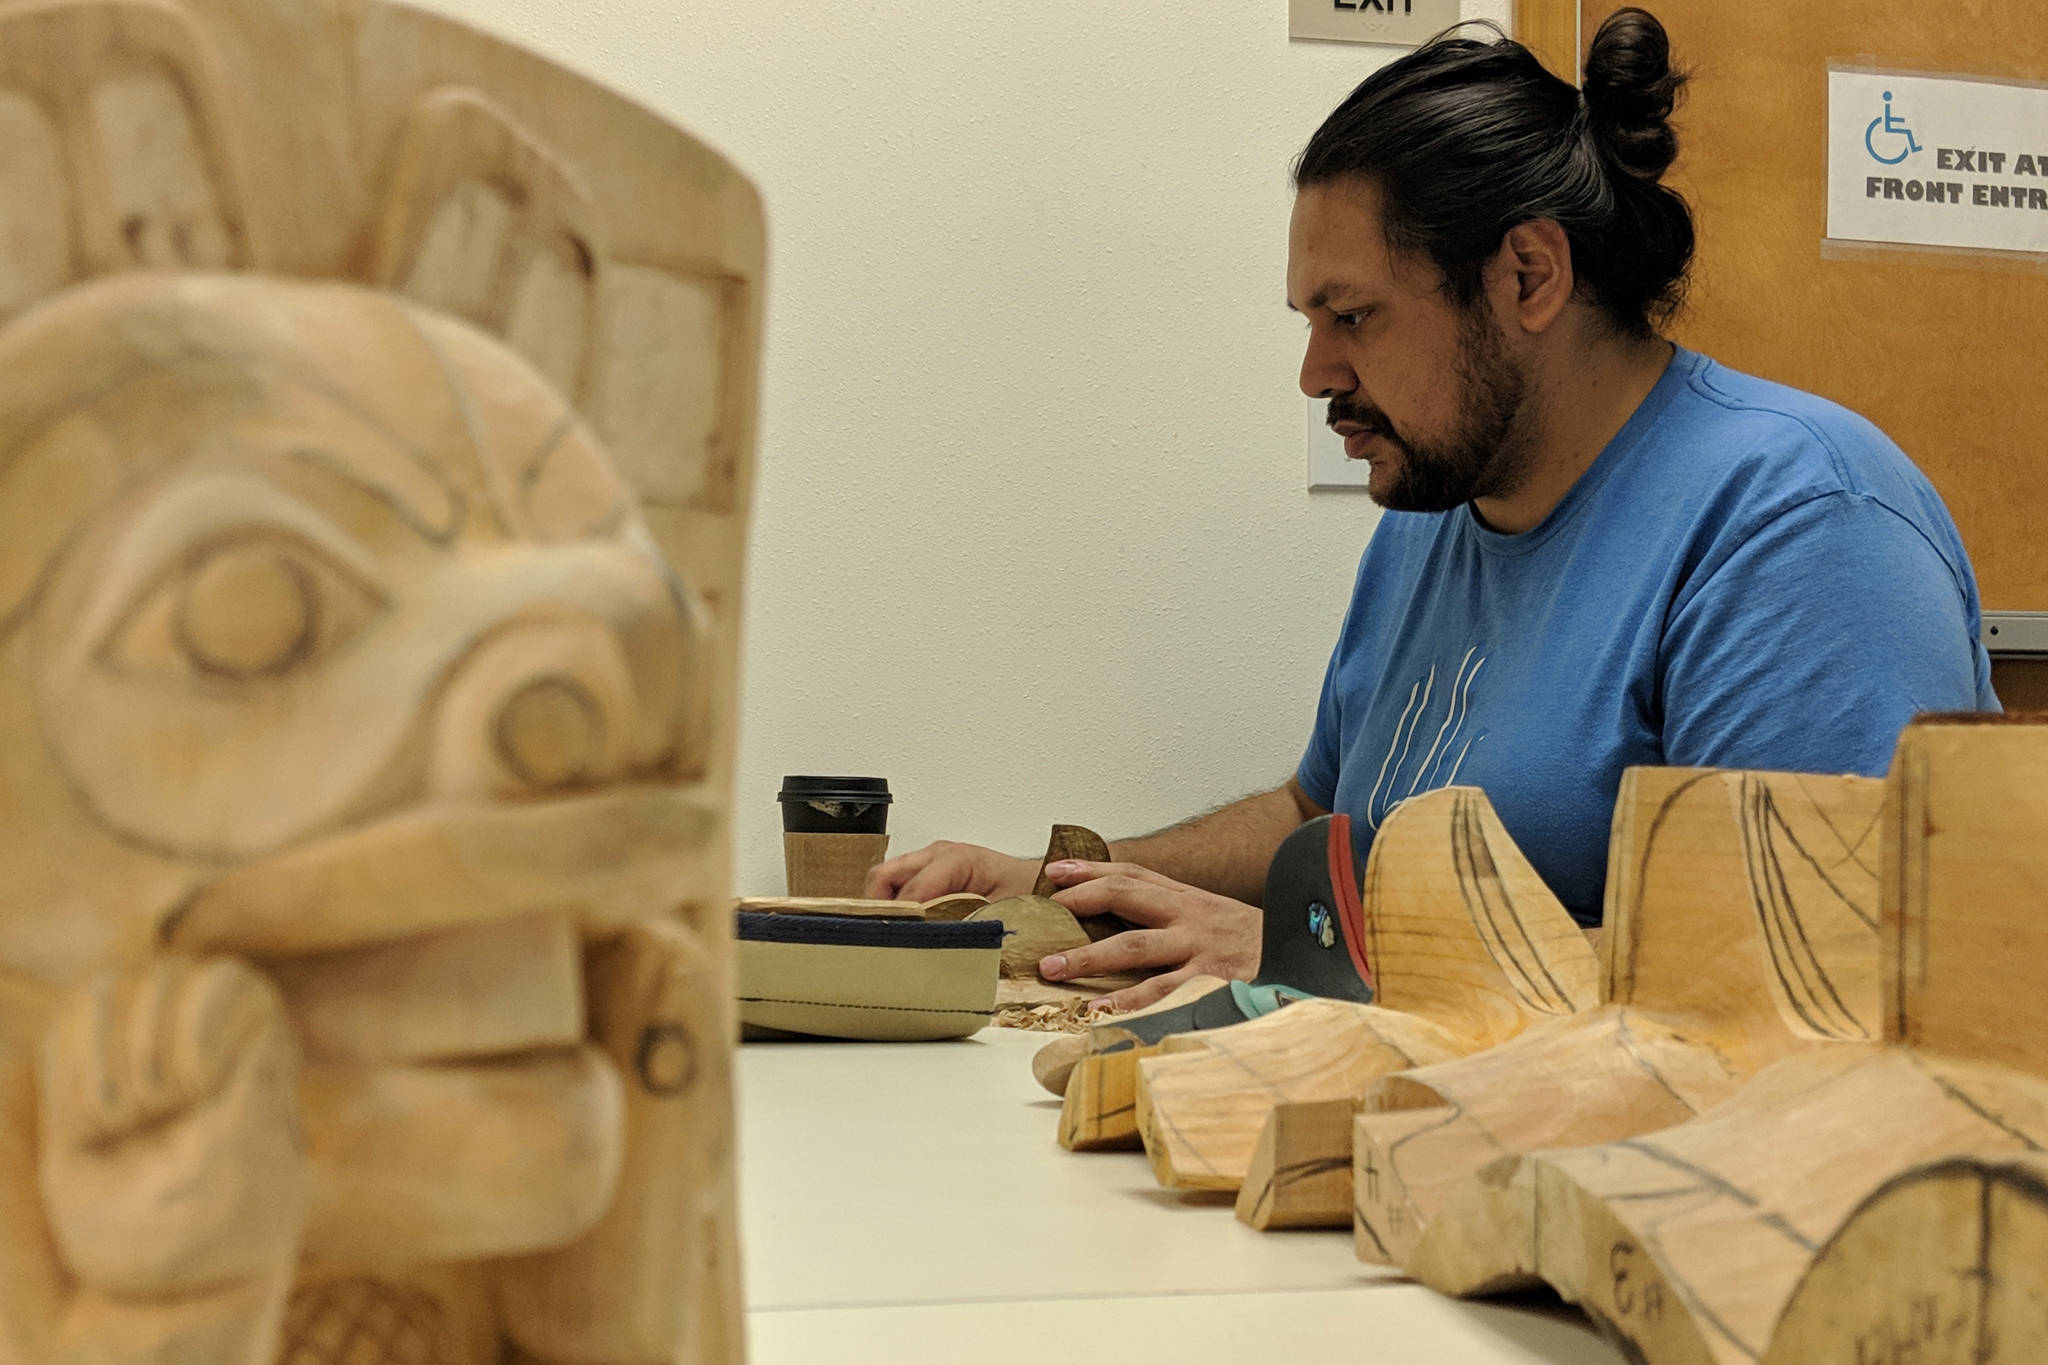 Tlingit-style carvers have a place to talk shop